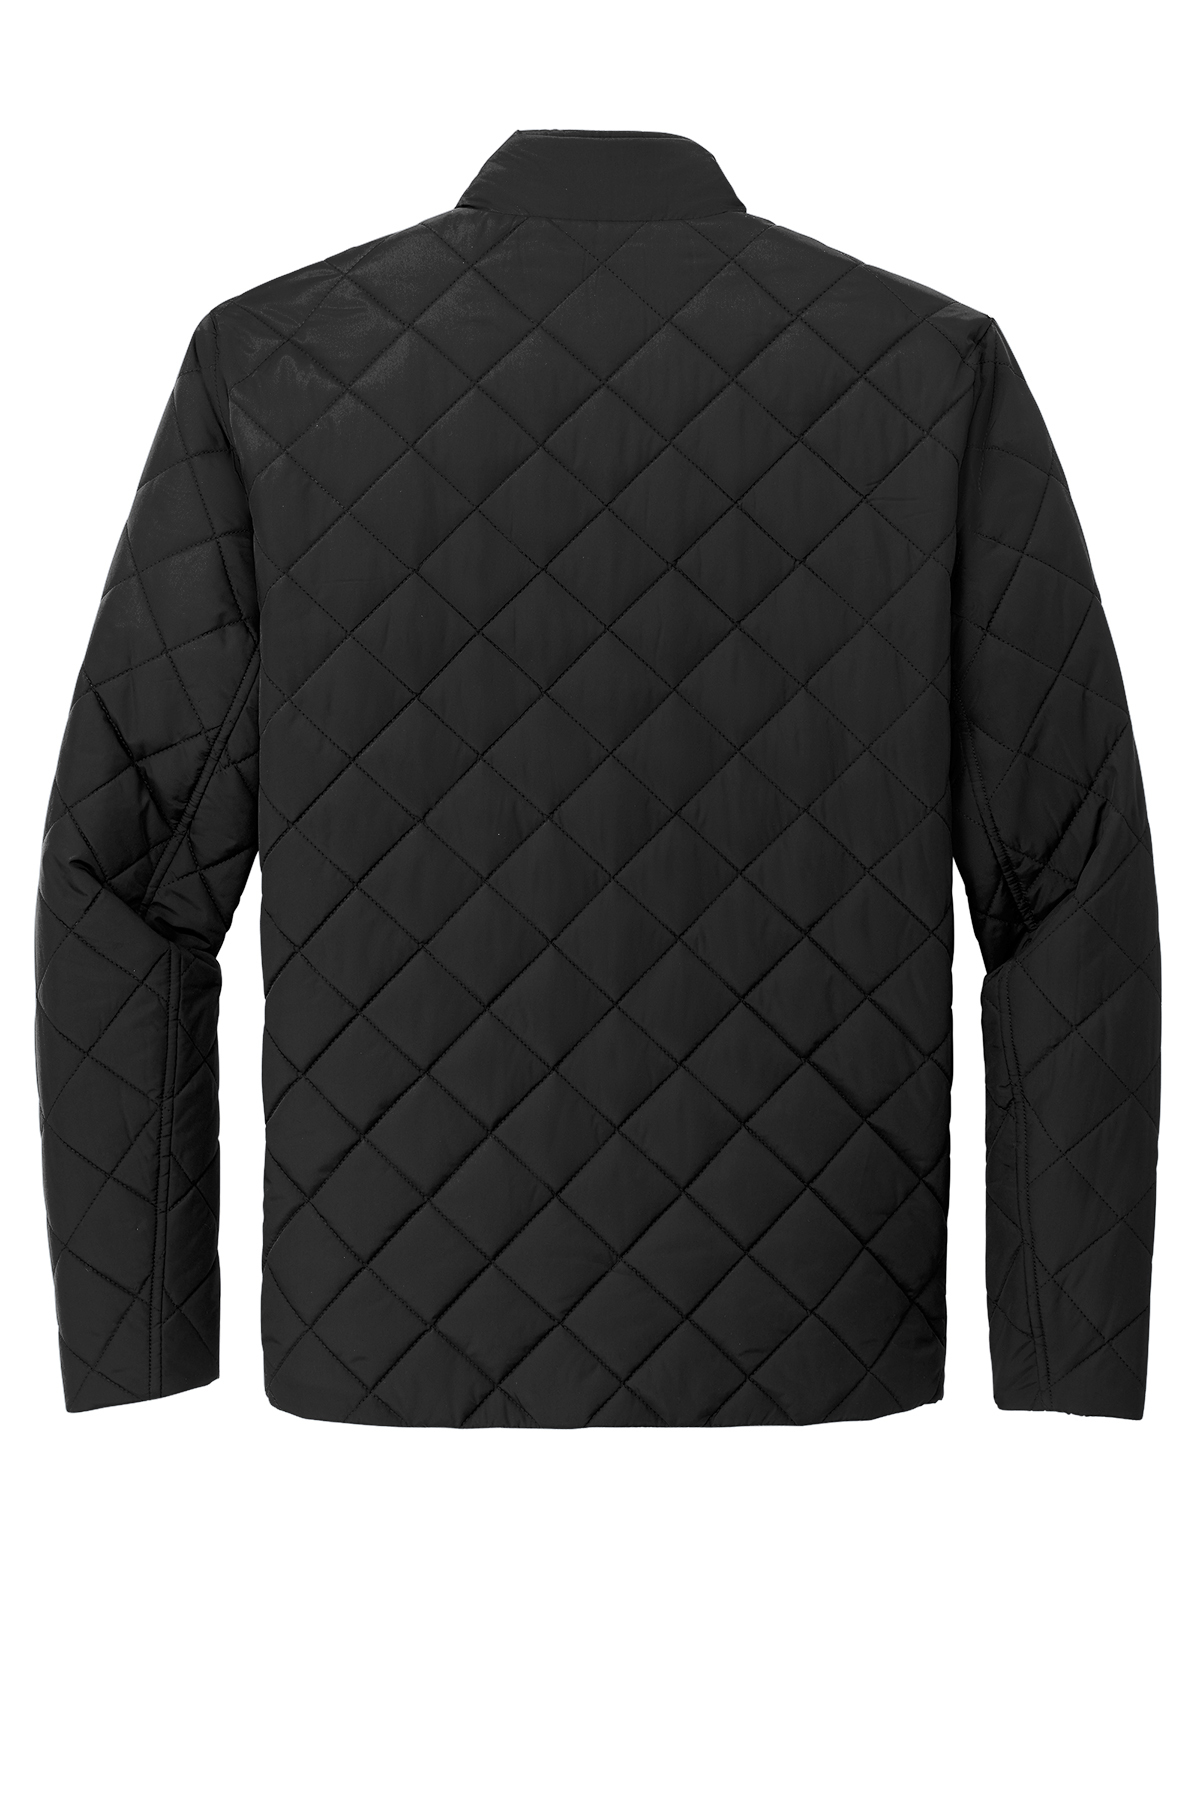 Brooks Brothers Quilted Jacket | Product | SanMar